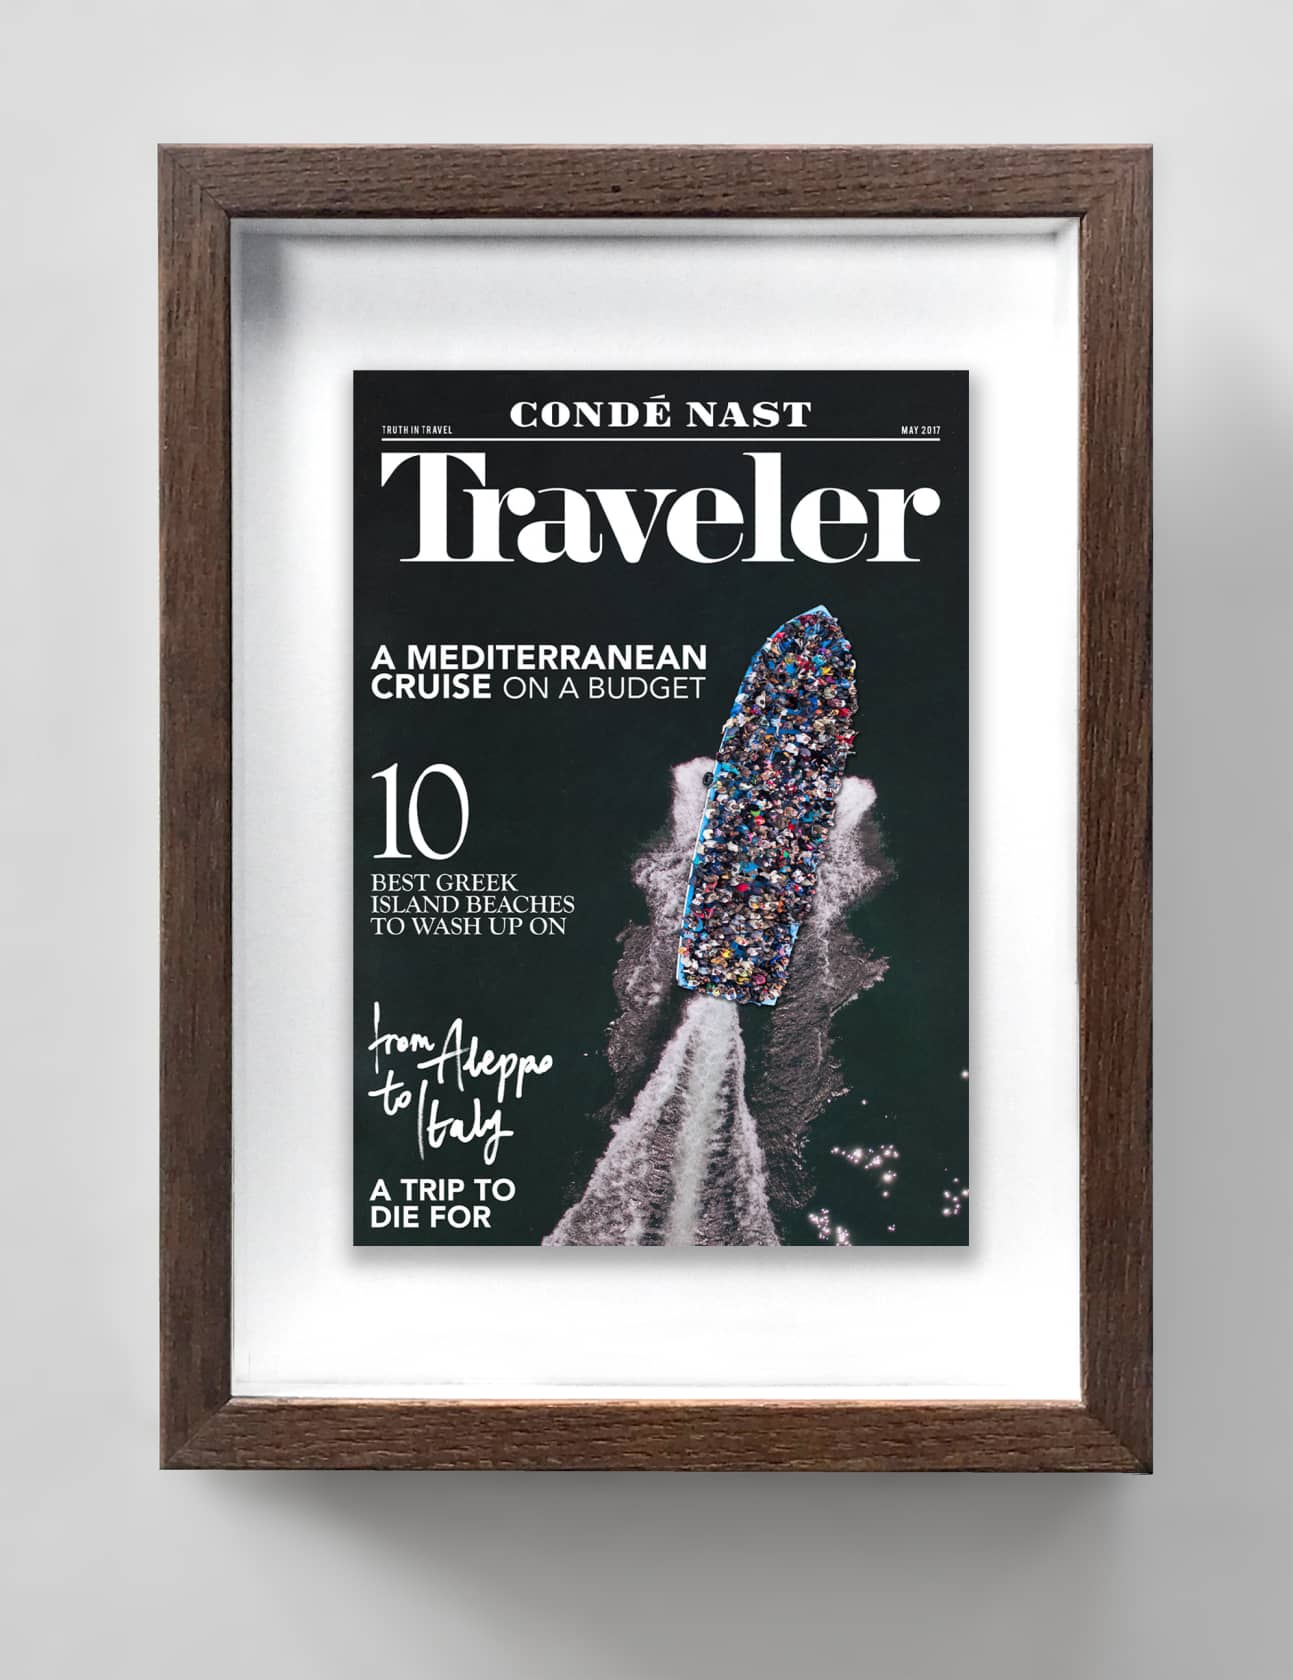 The Connor Brothers, Refuchic - Conde Nast Traveller, 2015